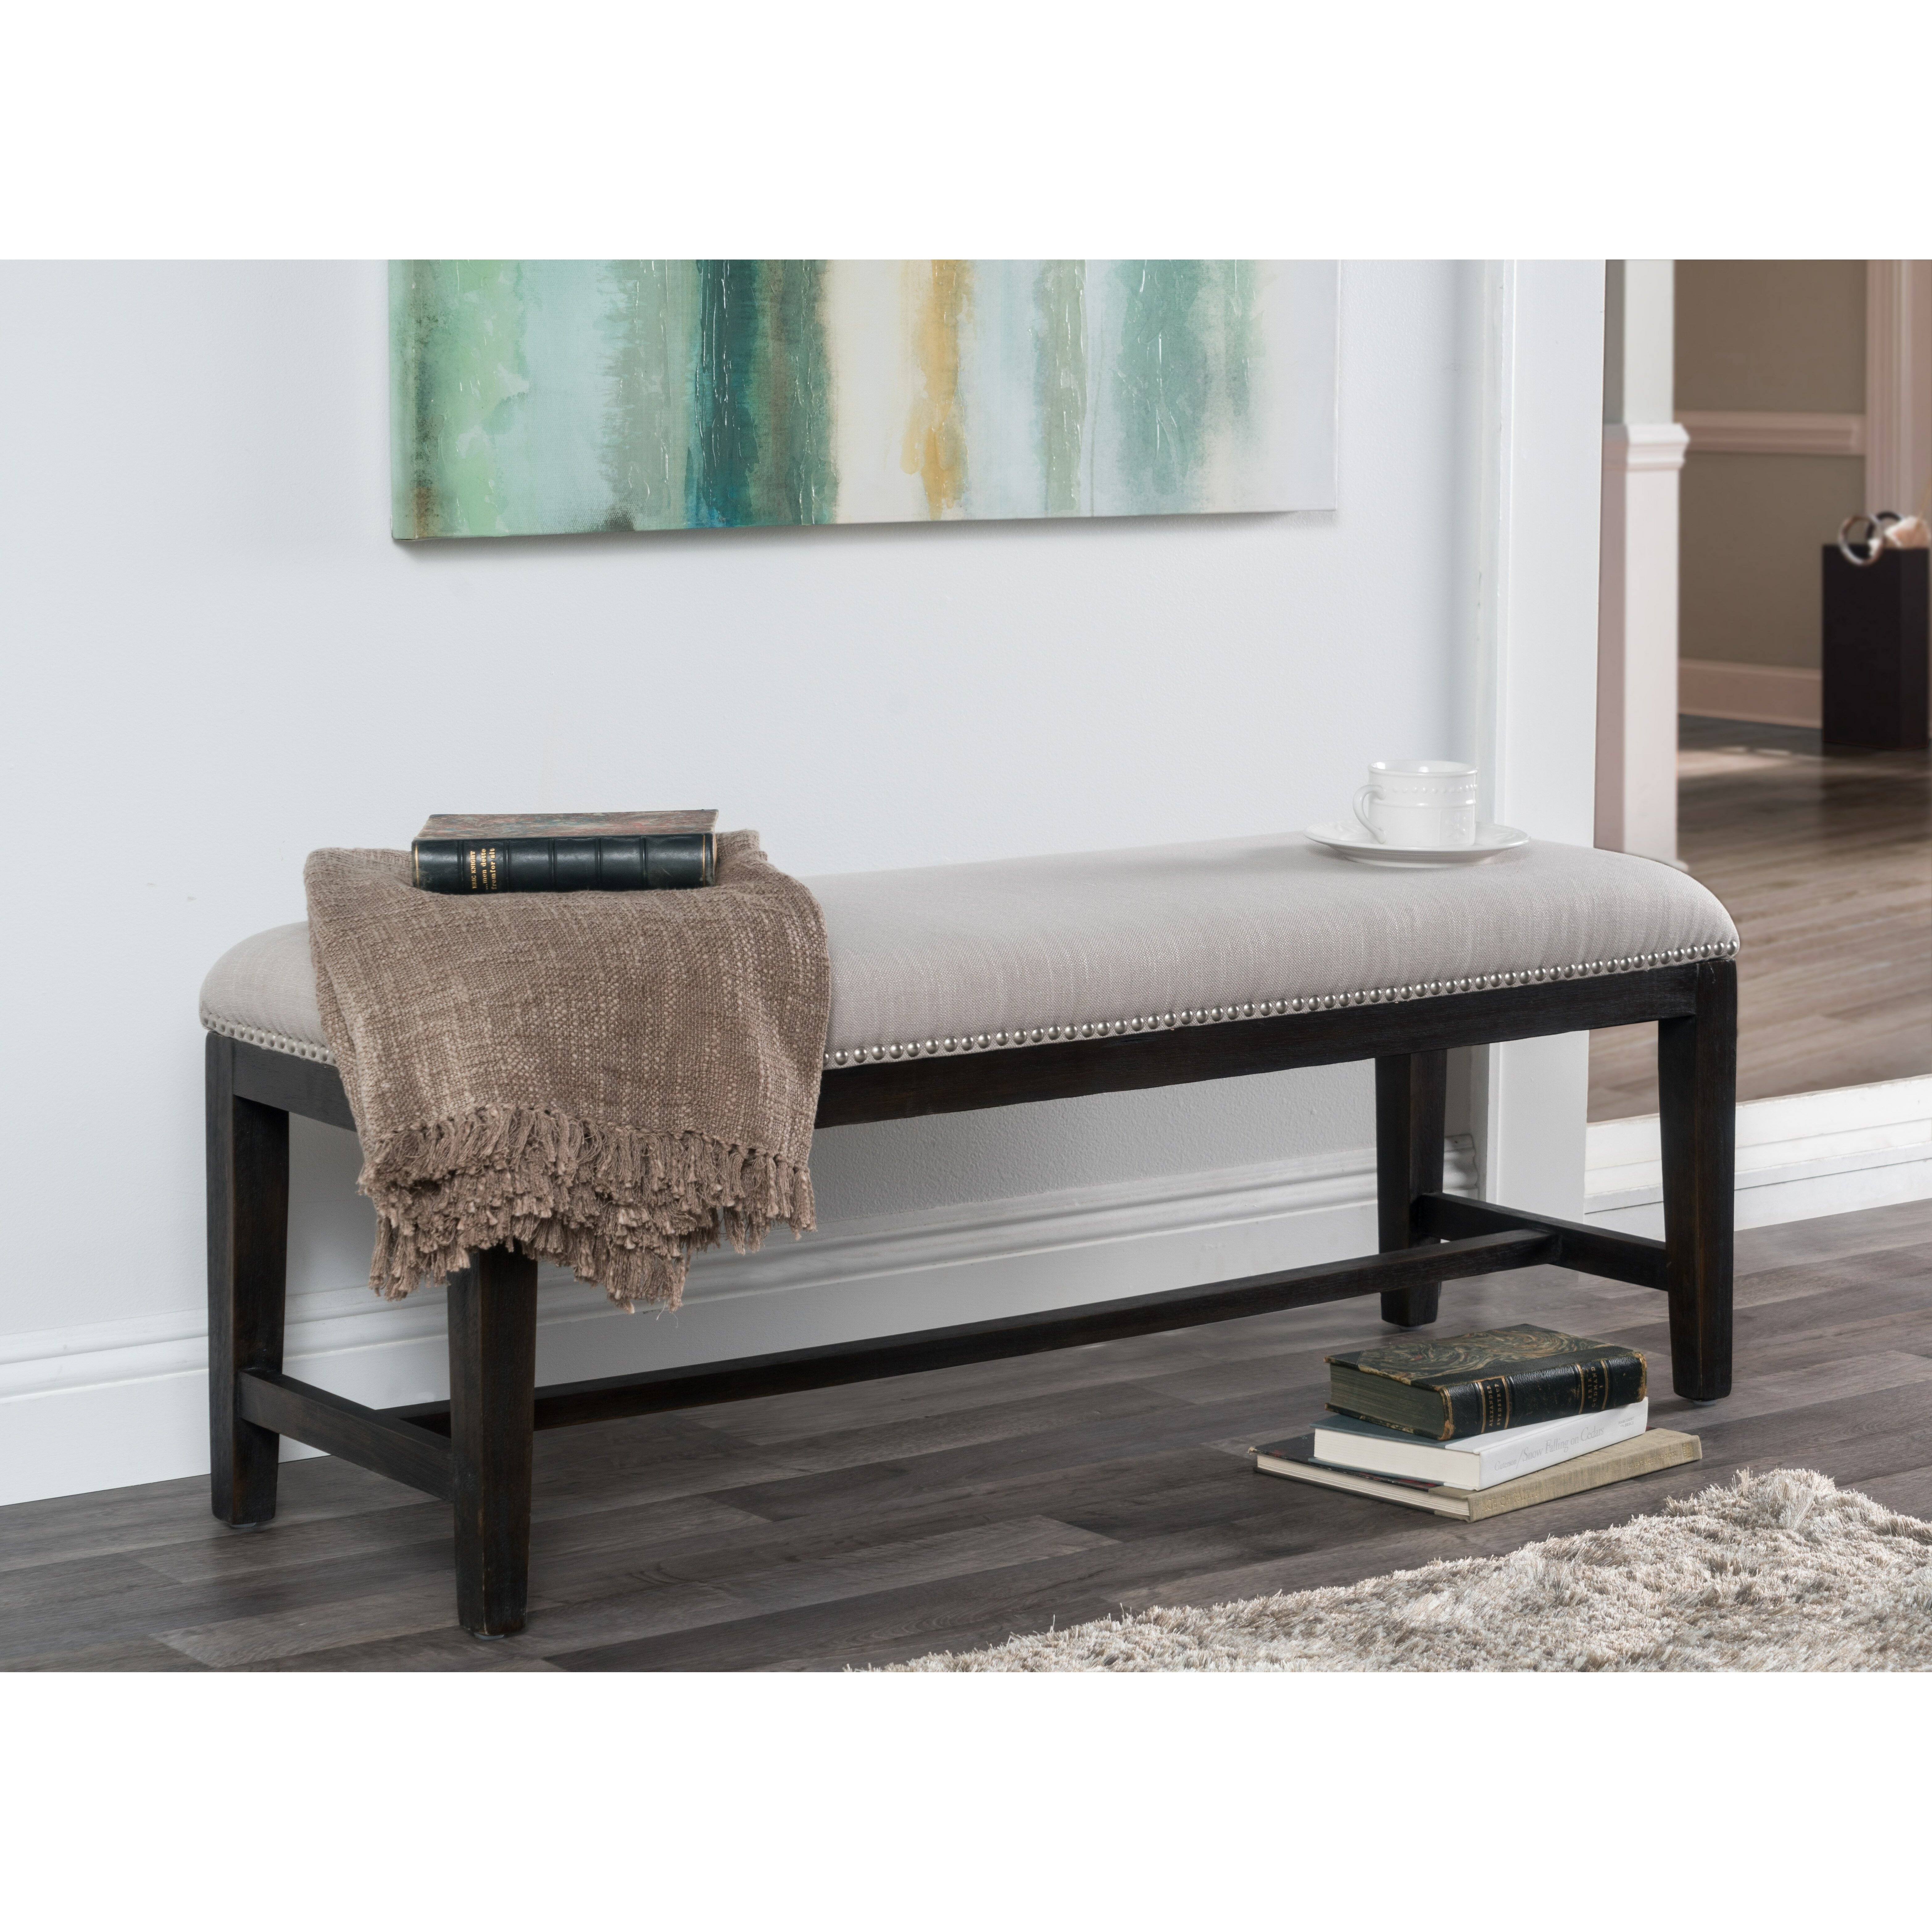 Stylish Upholstered Benches For Entryways